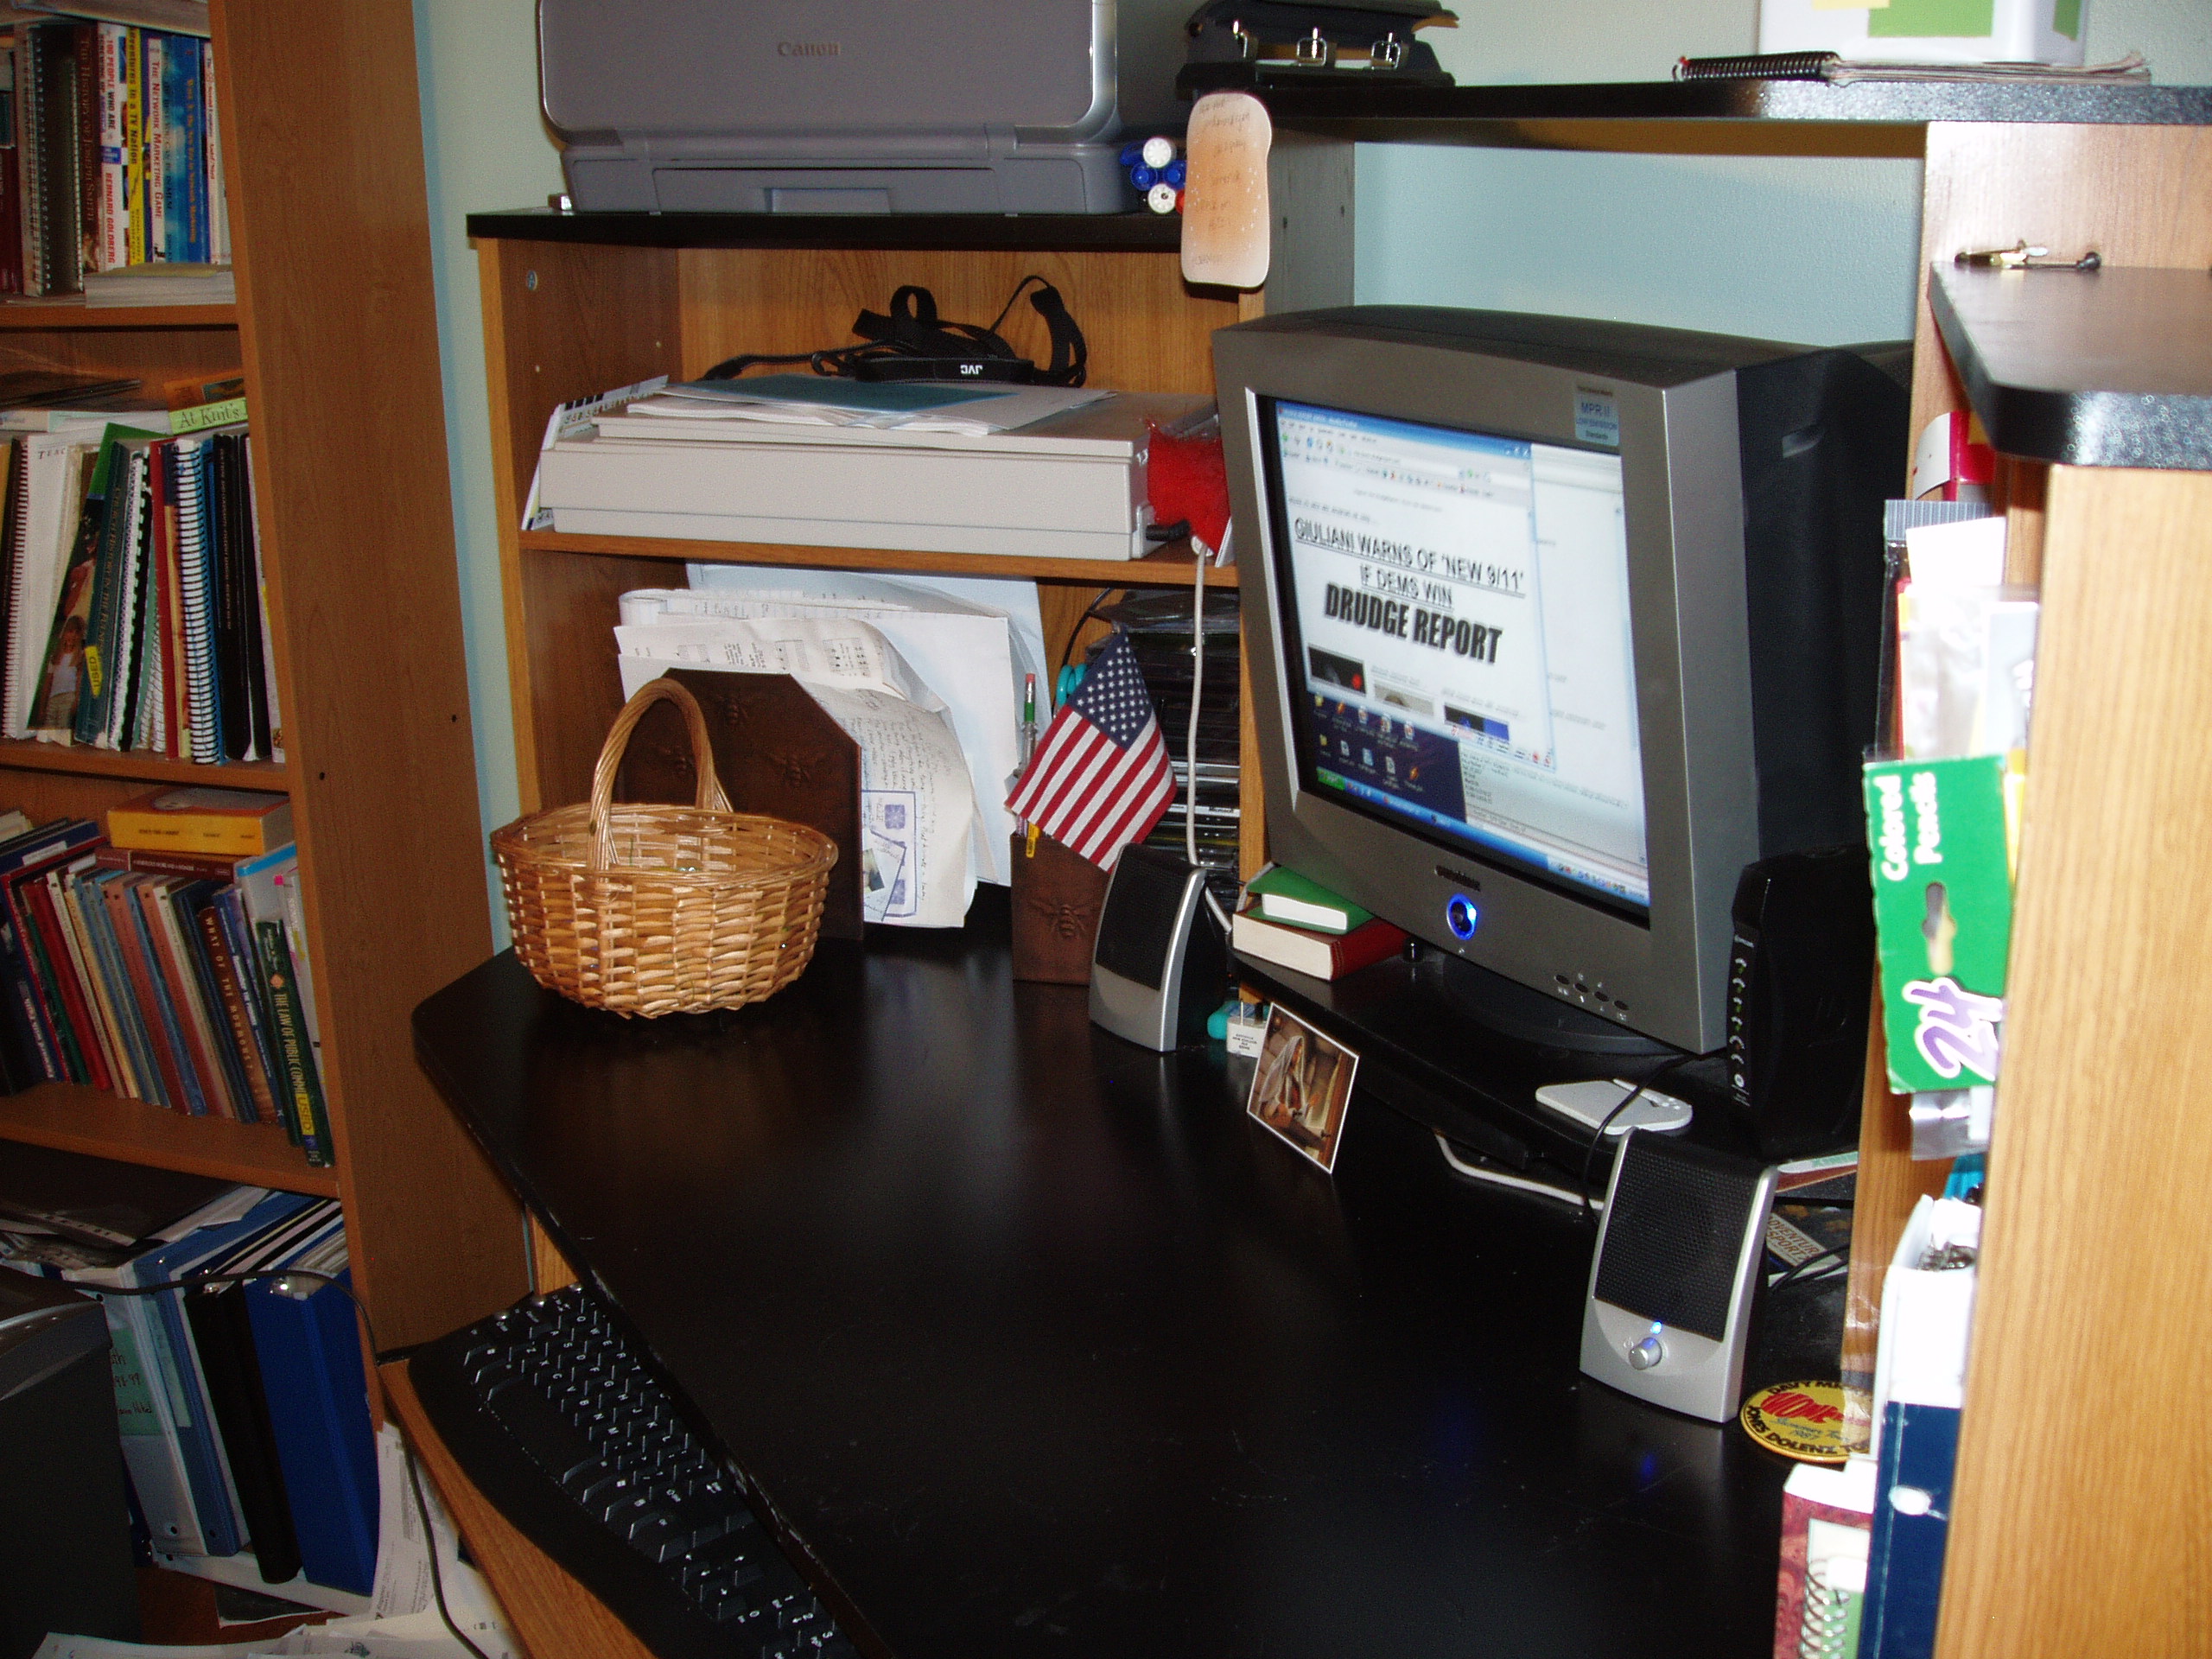 My desk, one of the rare times it was clean. I work at home.